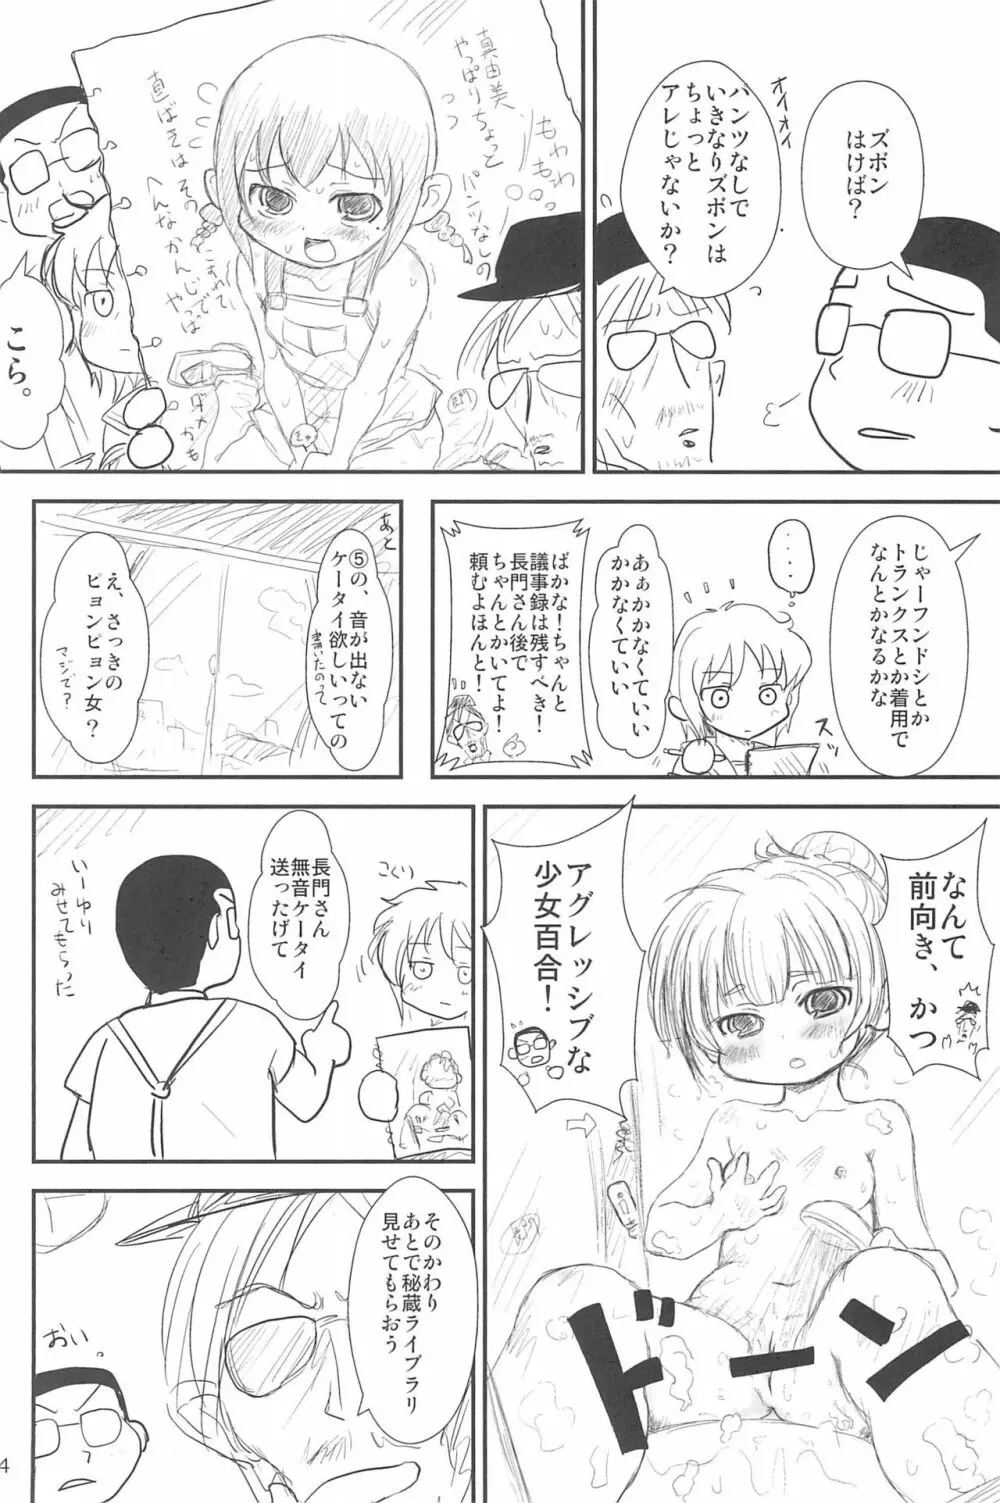 ND-special Volume 6 94ページ